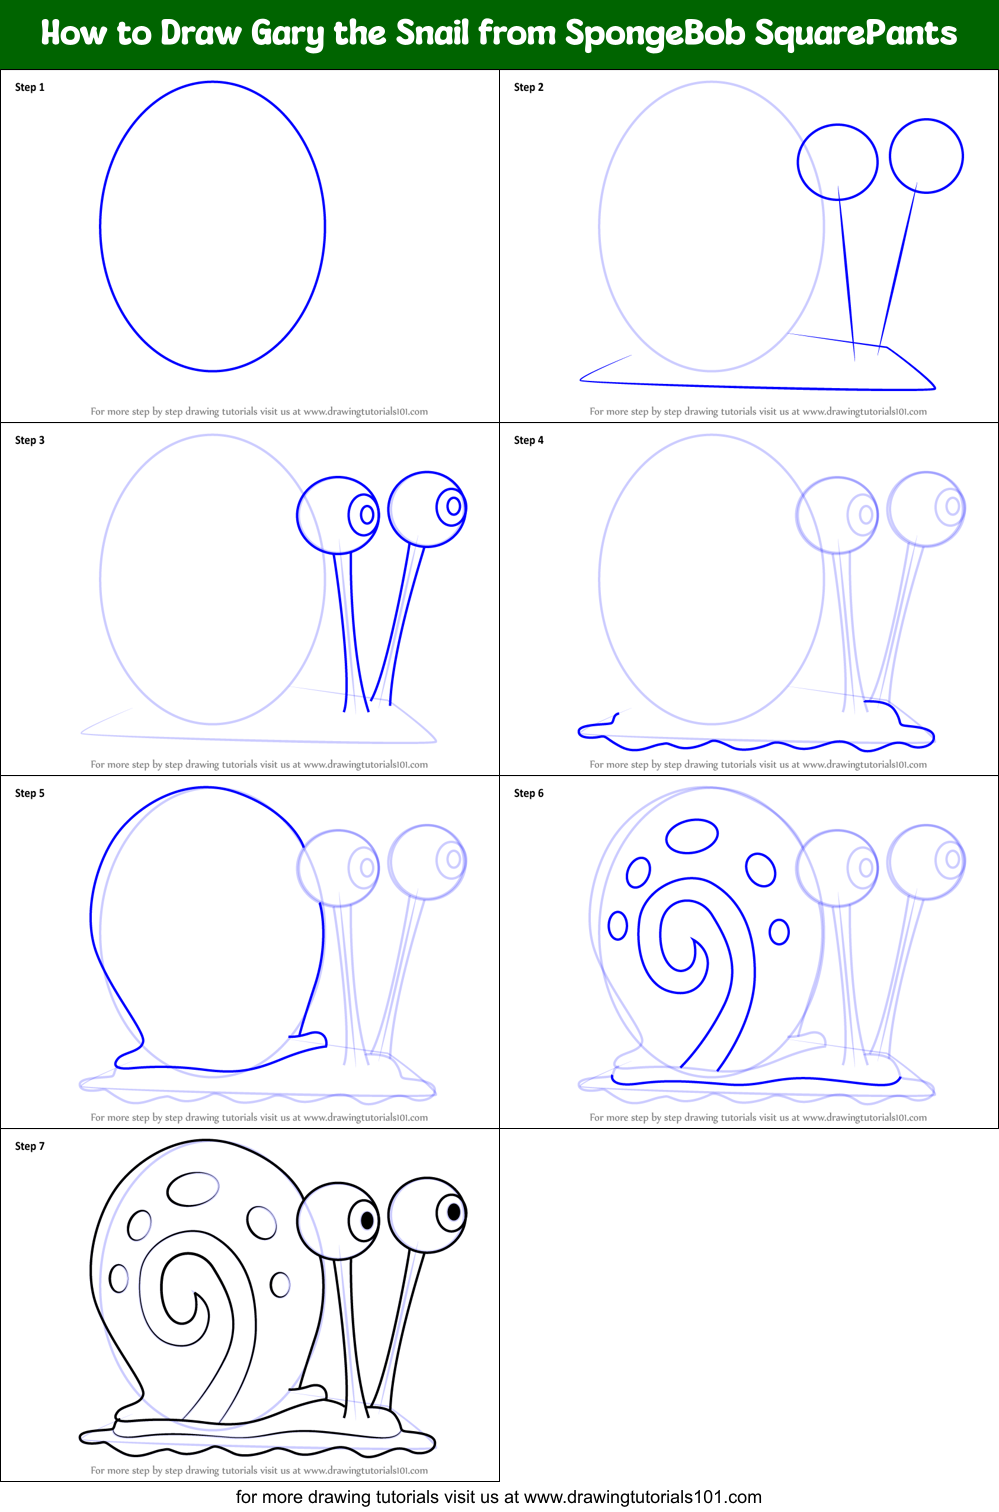 How to Draw Gary the Snail from SpongeBob SquarePants printable step by